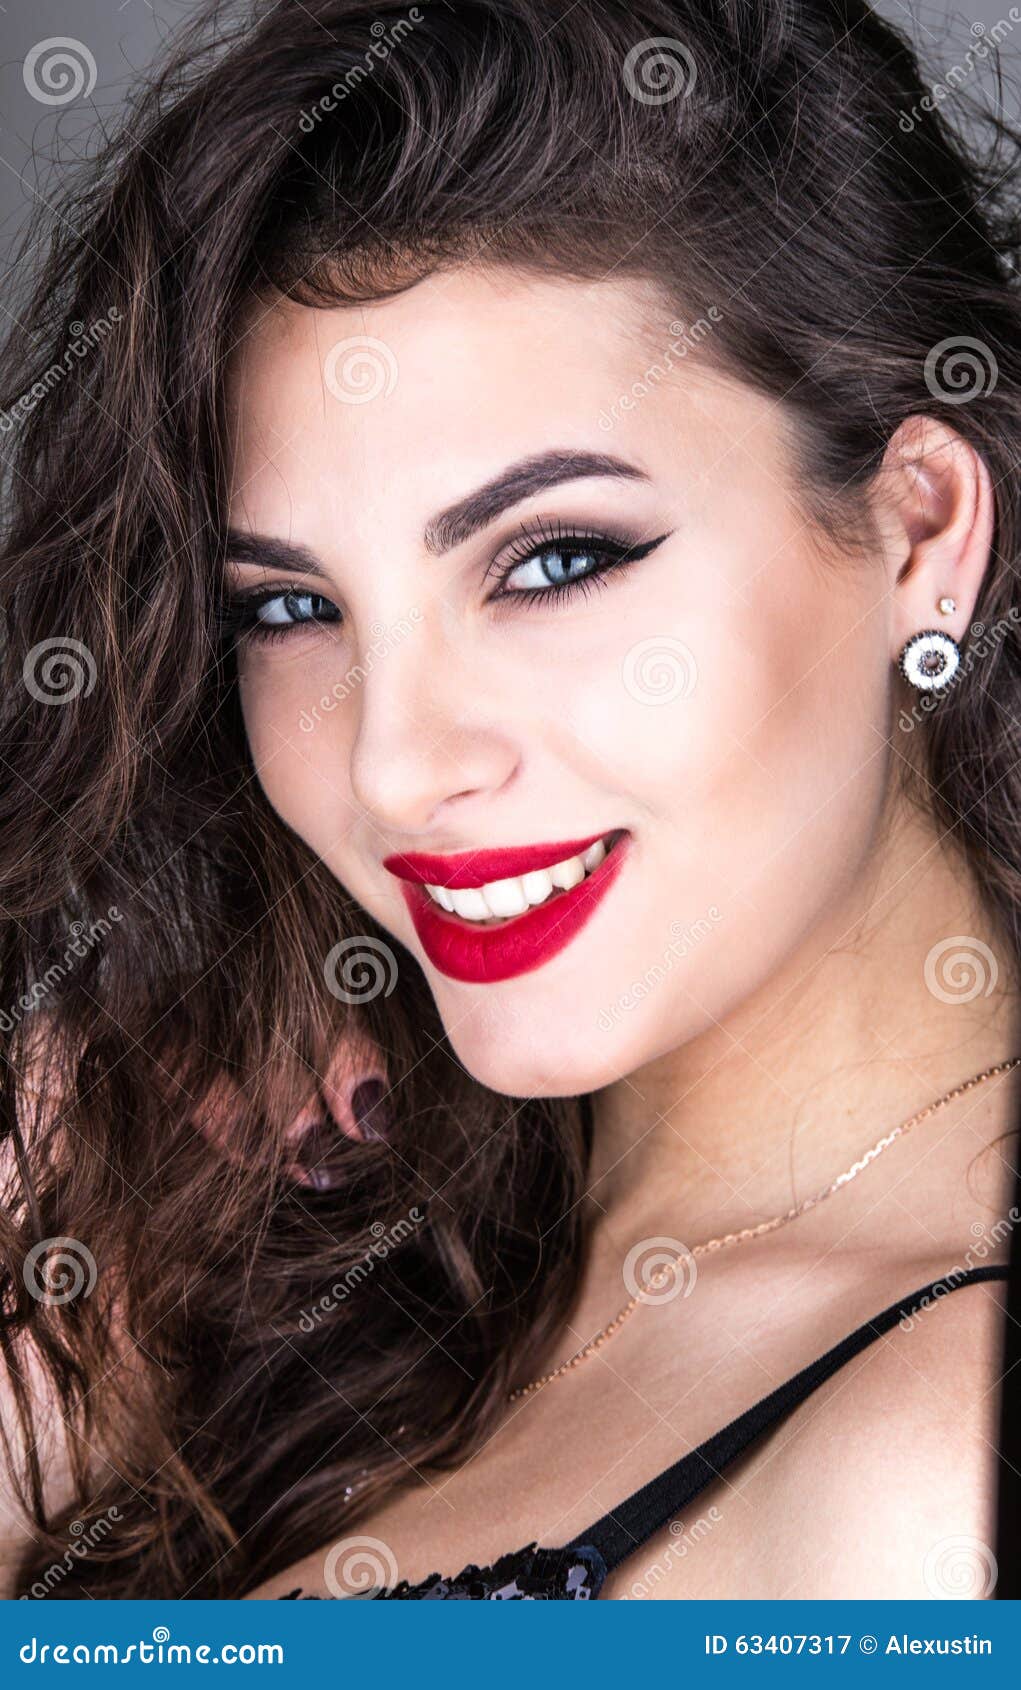 Smiling young woman stock image. Image of closeup, details - 63407317